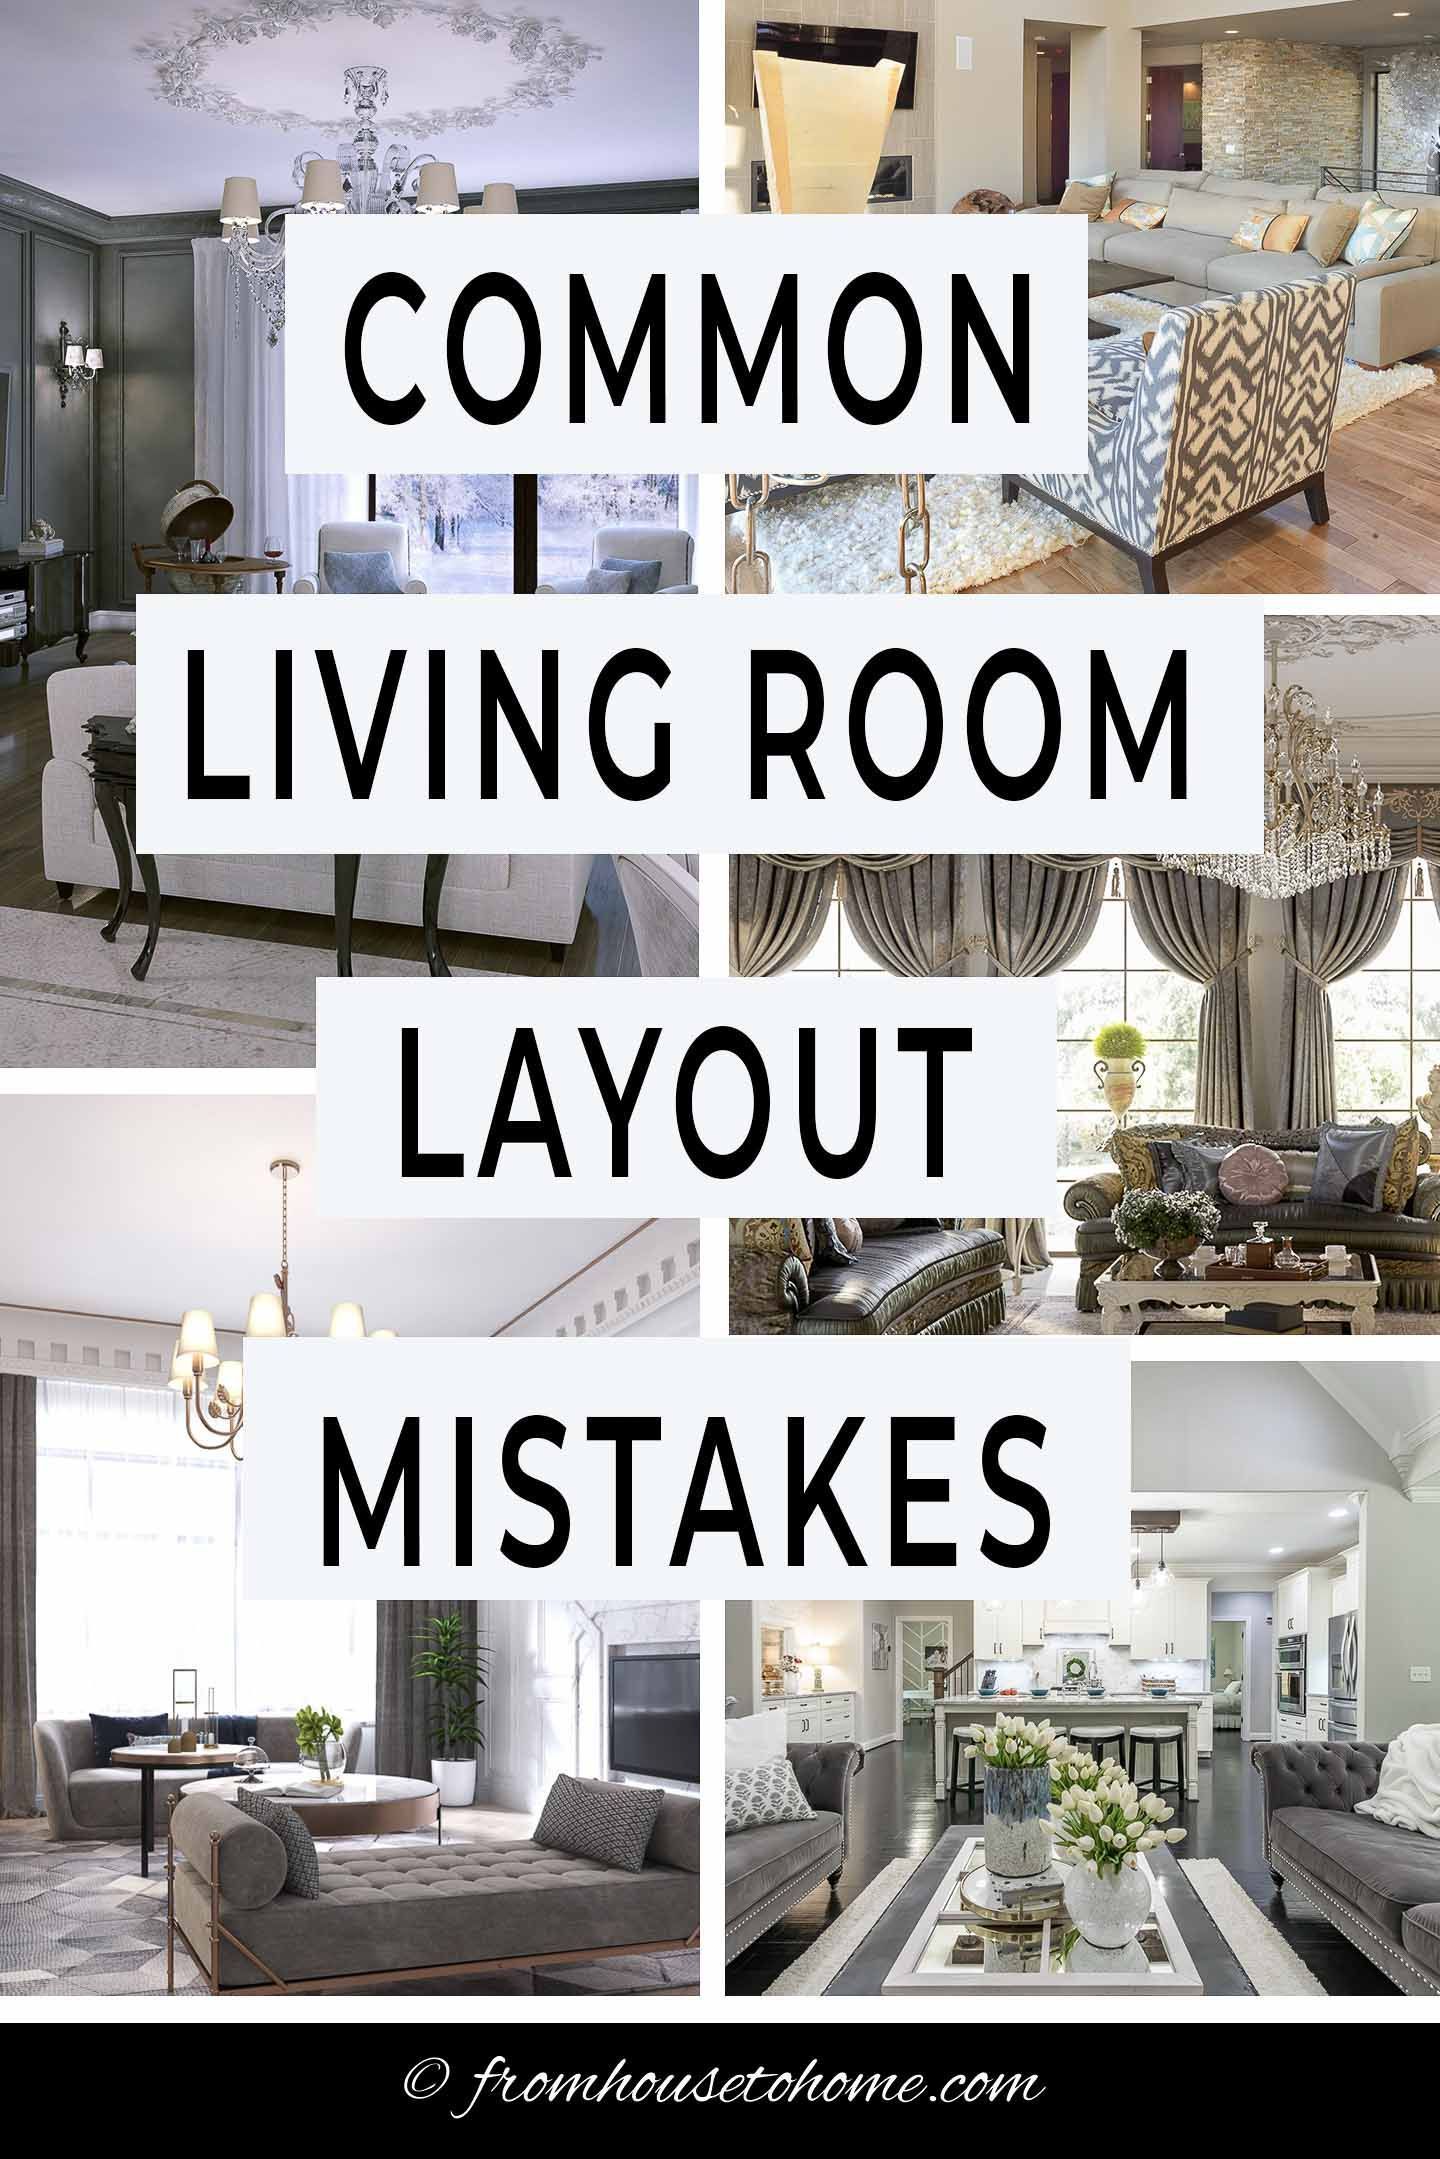 10 Common Living Room Layout Mistakes (And How To Fix Them) - 10 Common Living Room Layout Mistakes (And How To Fix Them) -   17 beauty Room layout ideas